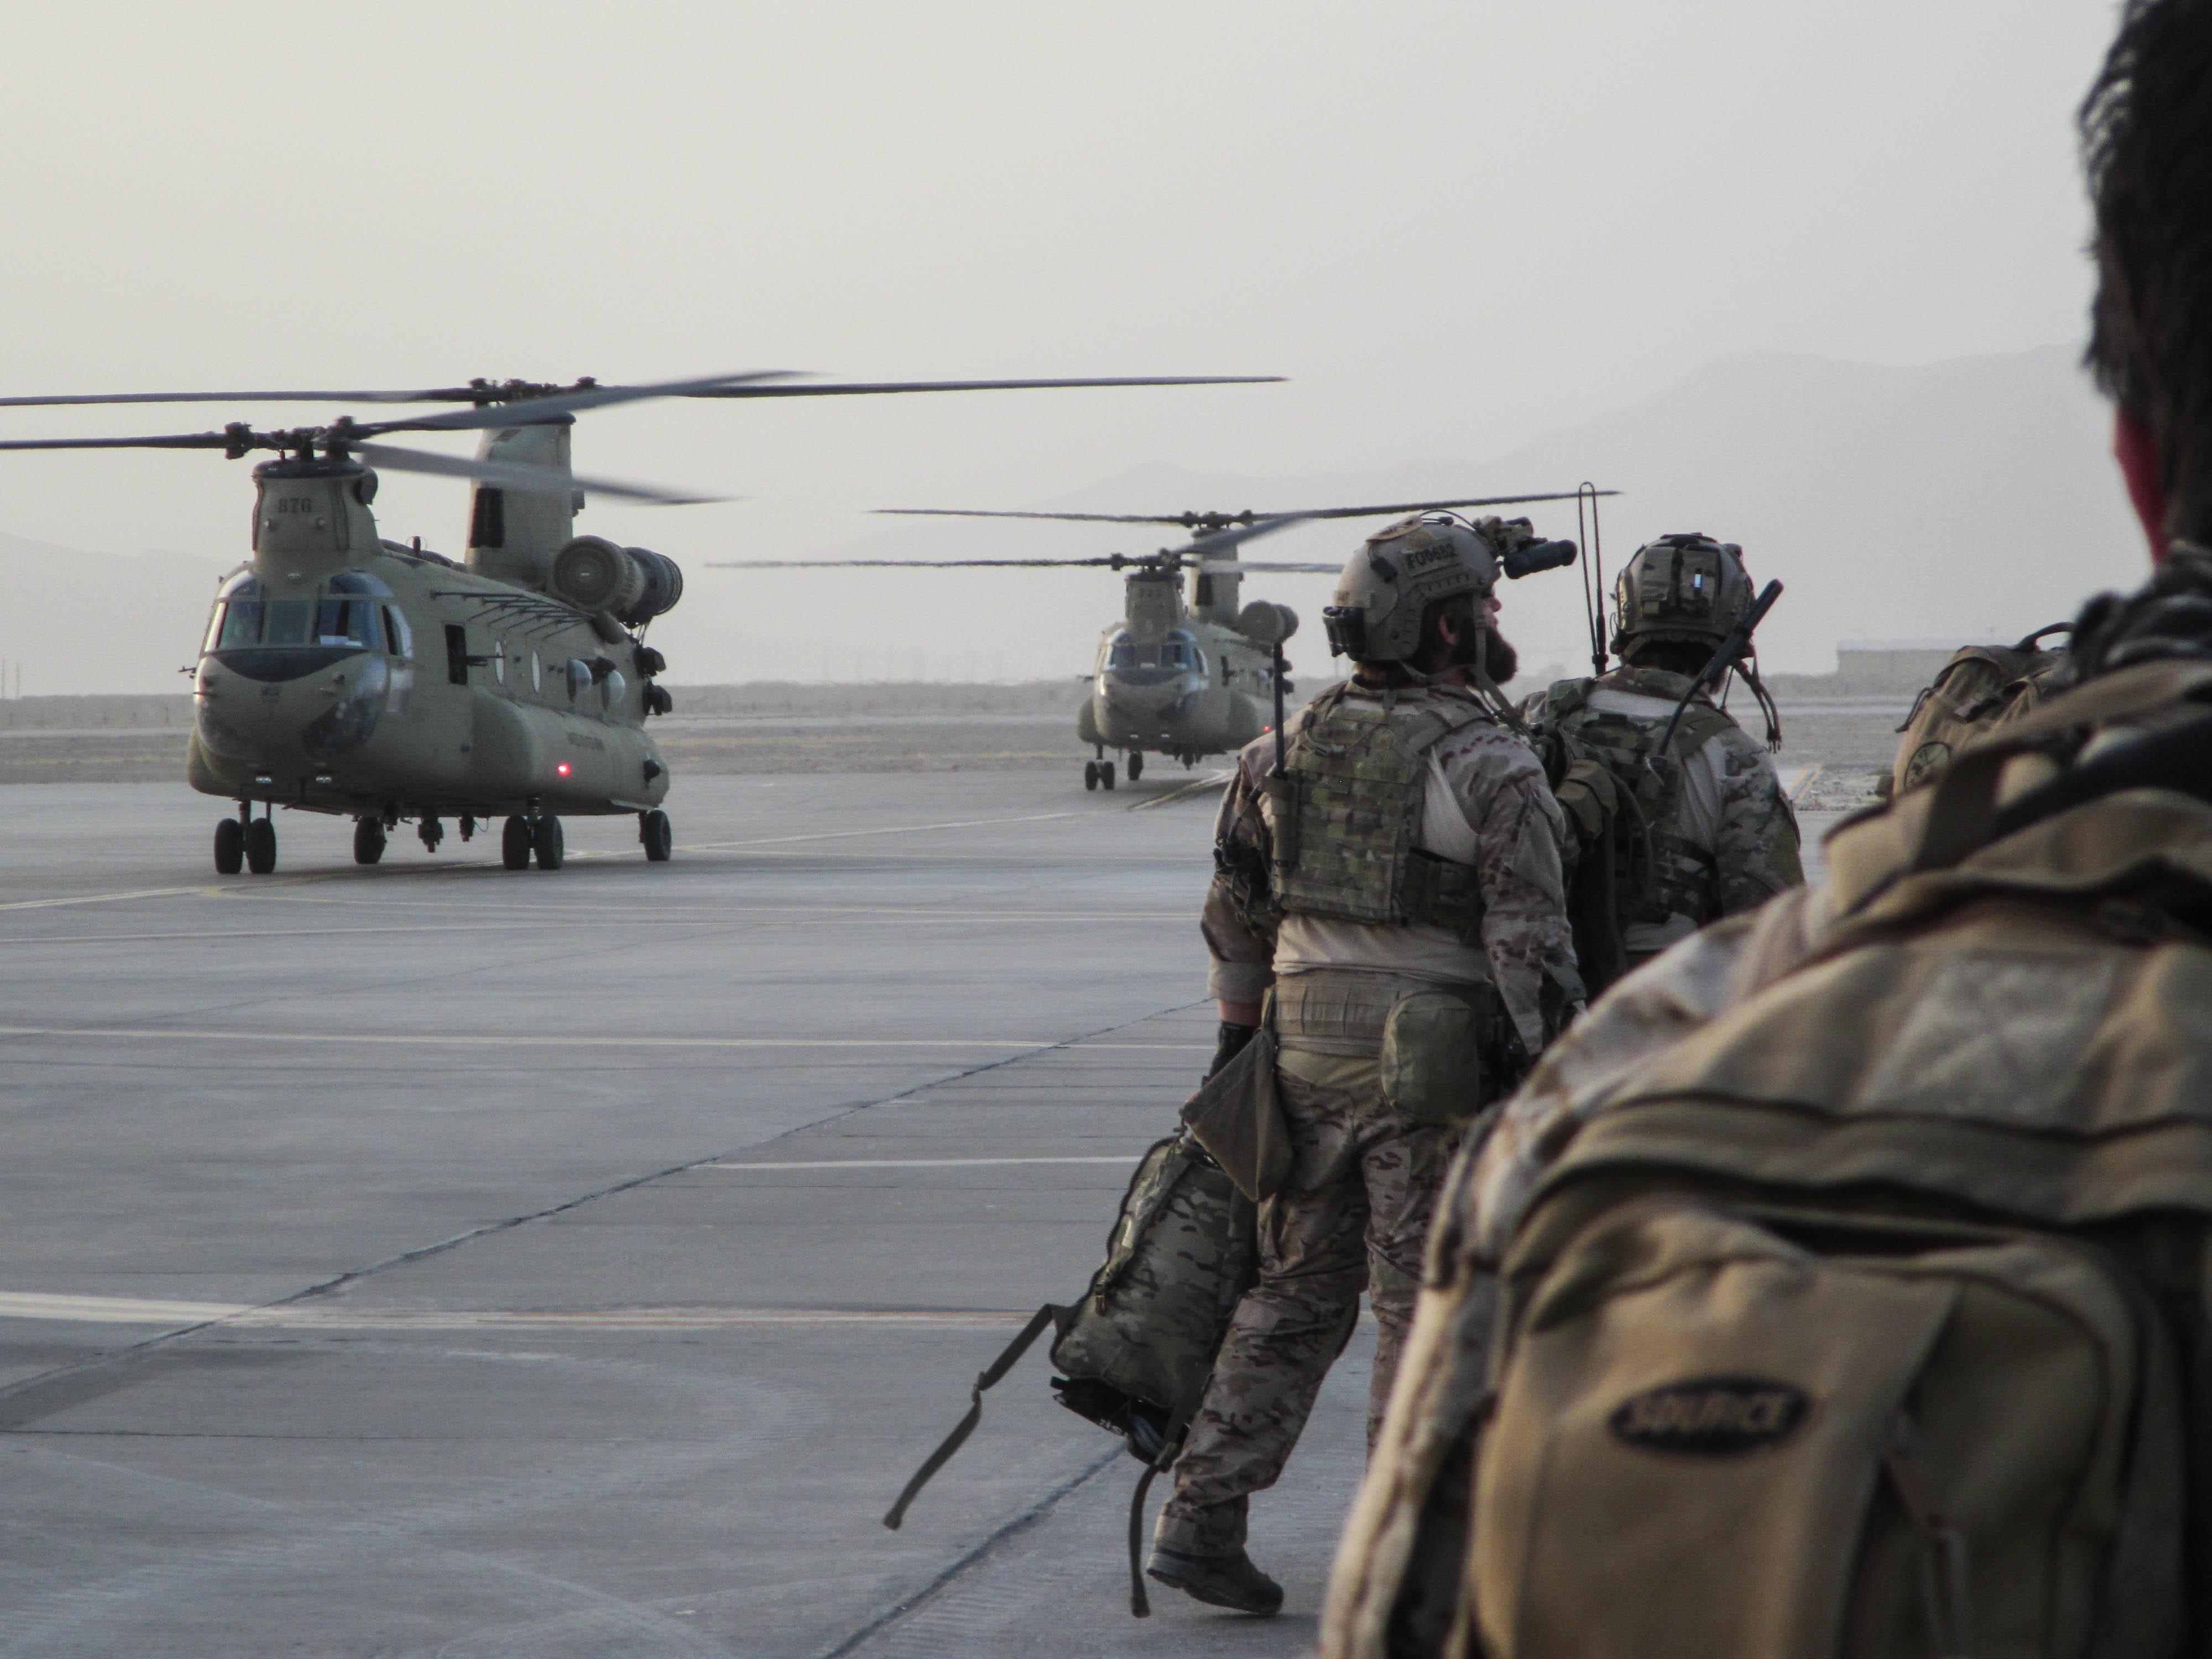 U.S. Special Forces Soldiers, attached to Special Operations Task Force-Afghanistan, alongside Afghan agents from the National Interdiction Unit, NIU, prepare to load onto CH-47 Chinook Helicopters prior to an operation in the Ghorak district, Helmand province, Afghanistan, Sept. 12, 2016. The operation was conducted to disrupt and destroy drug labs owned by the Taliban in the area. (U.S. Army photo by Sgt. Connor Mendez/Reviewed)